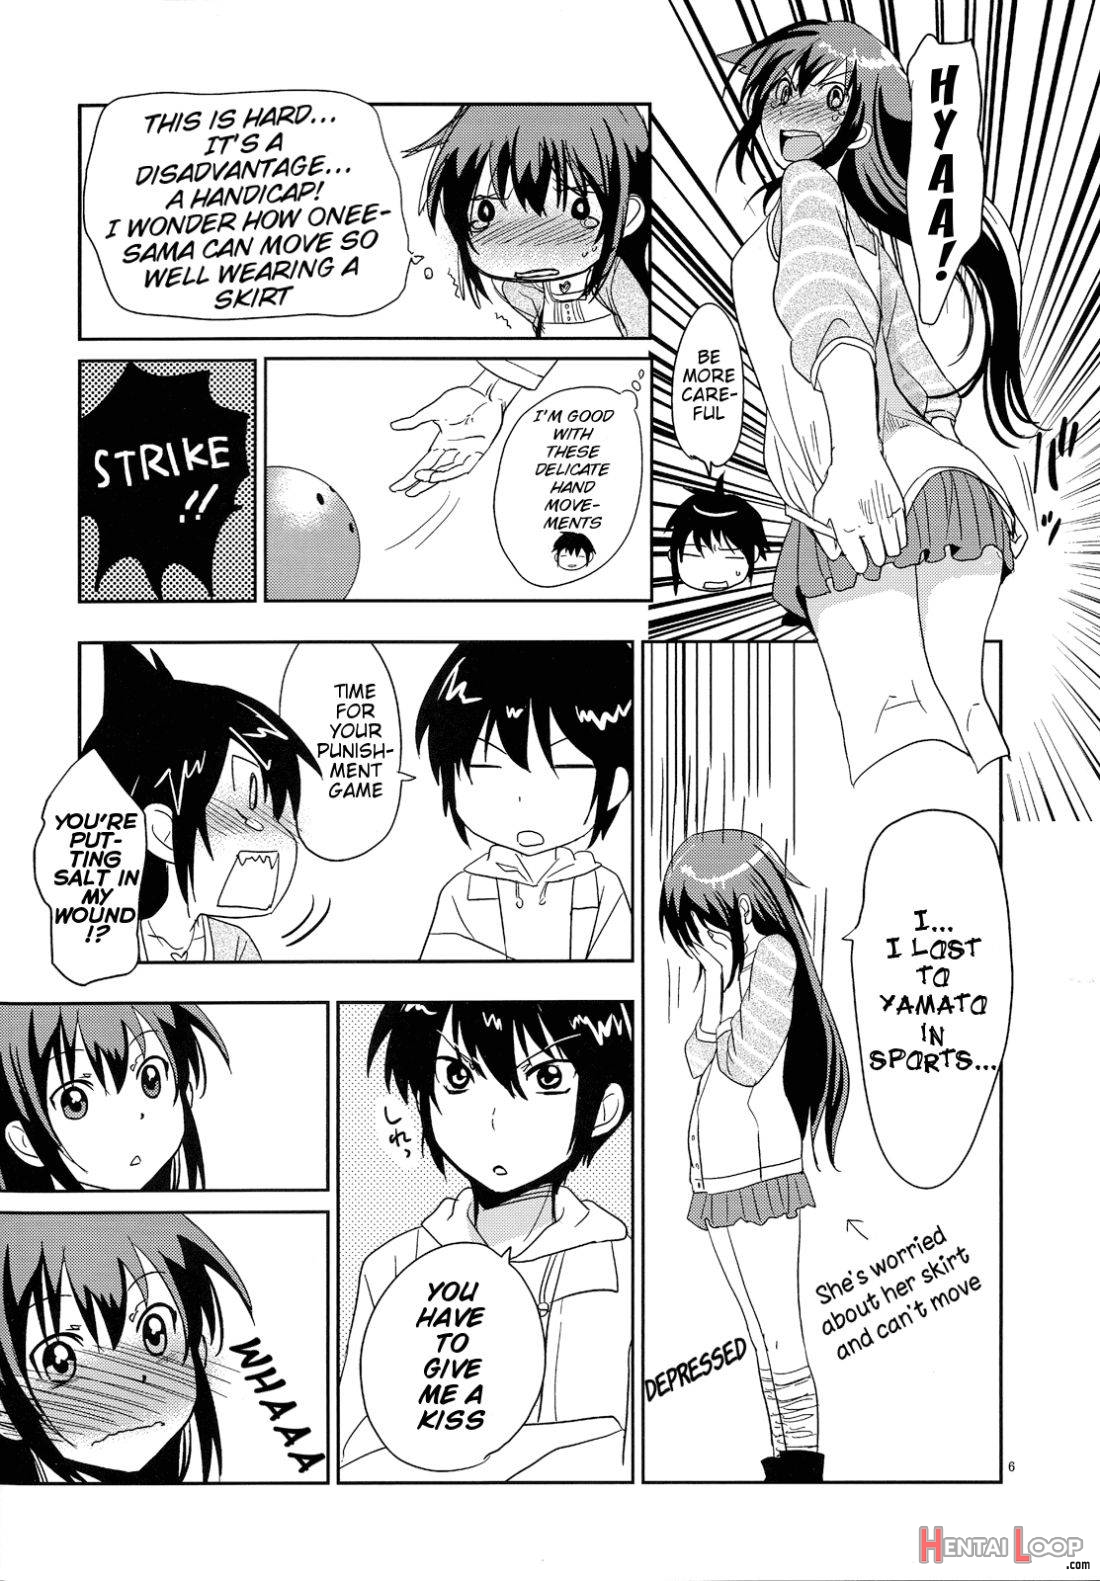 Wanko-san to Date! page 7